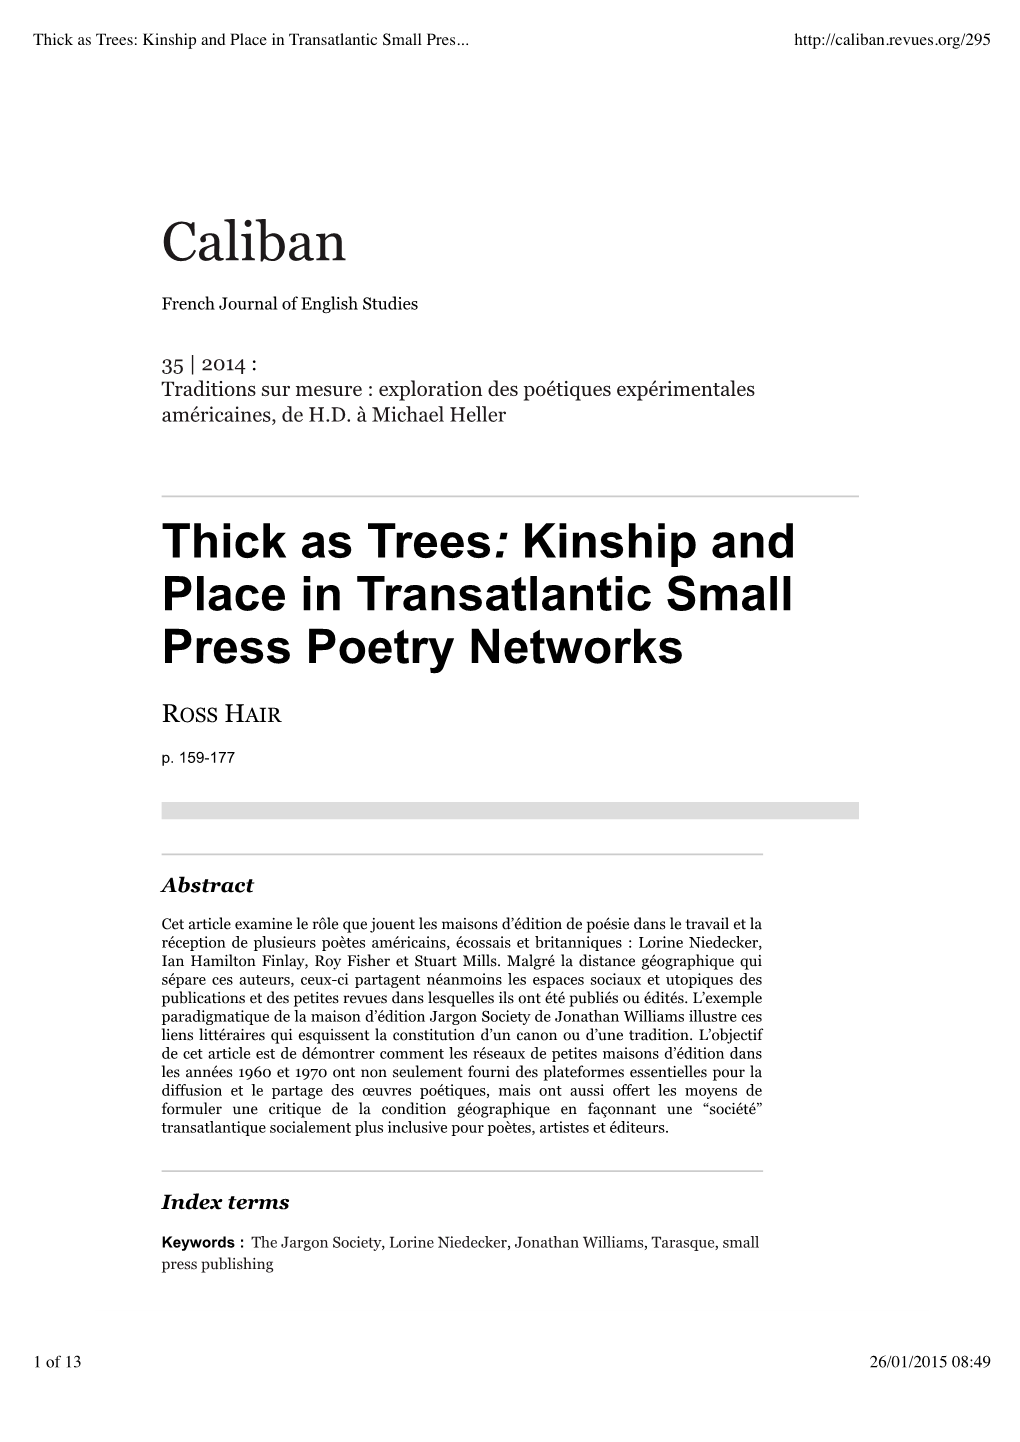 Thick As Trees: Kinship and Place in Transatlantic Small Press Poetry Networks